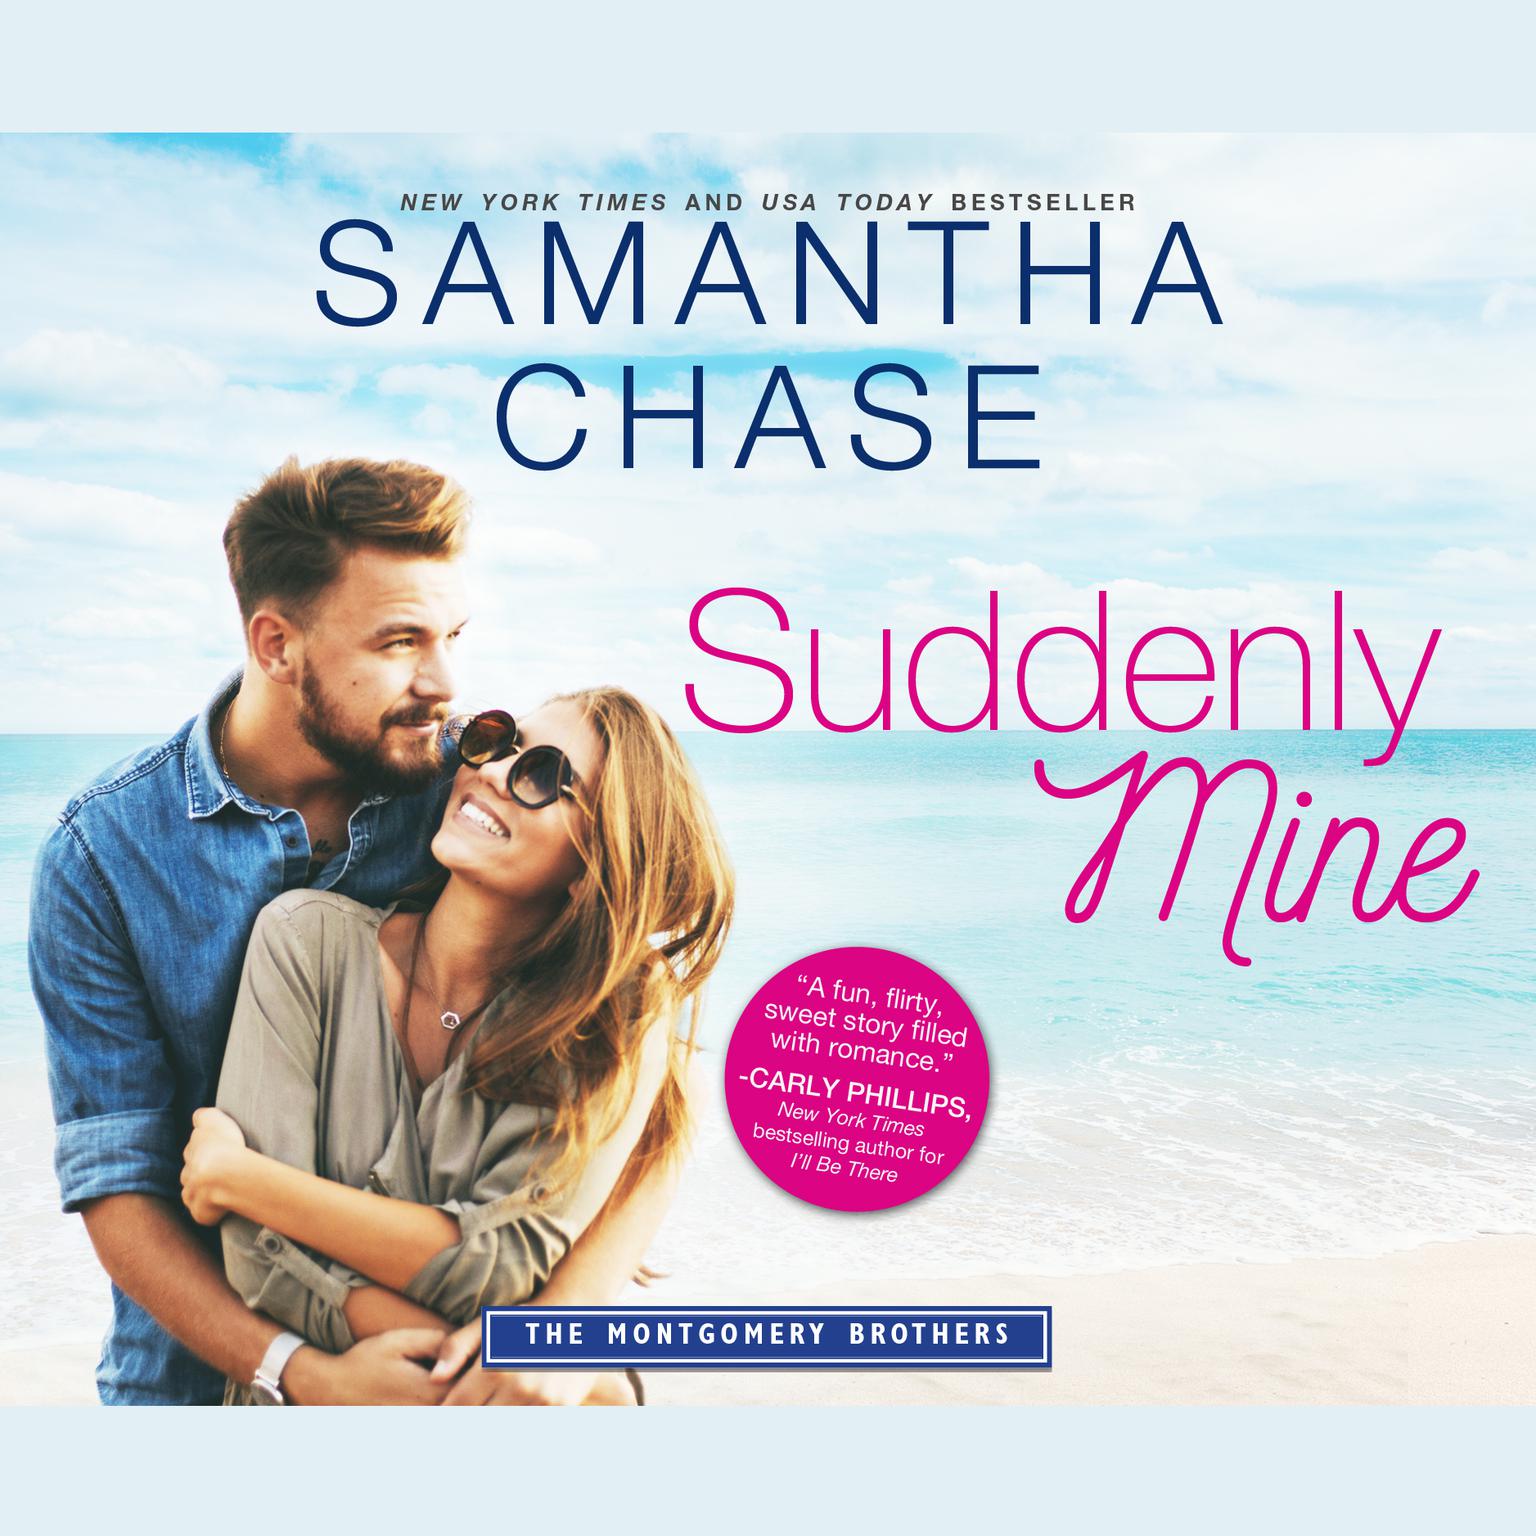 Suddenly Mine Audiobook, by Samantha Chase